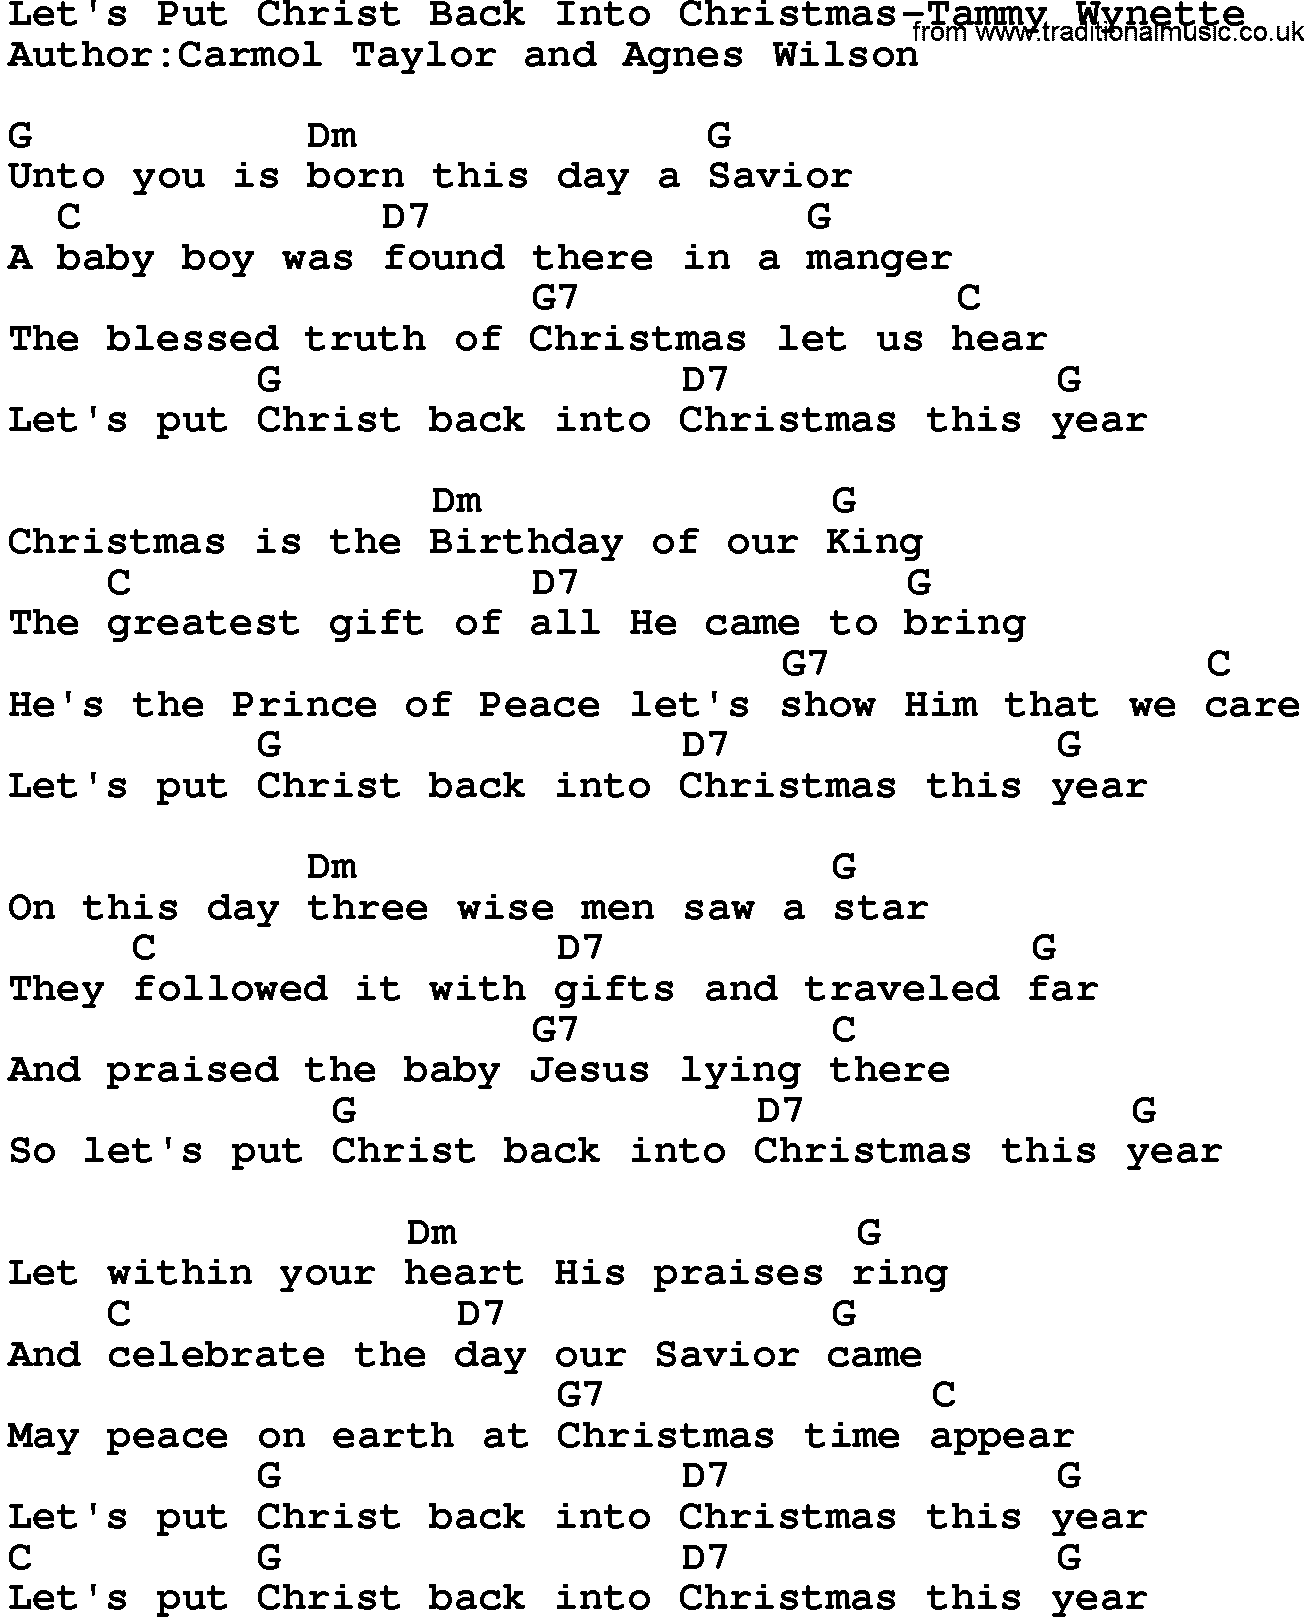 Country music song: Let's Put Christ Back Into Christmas-Tammy Wynette lyrics and chords